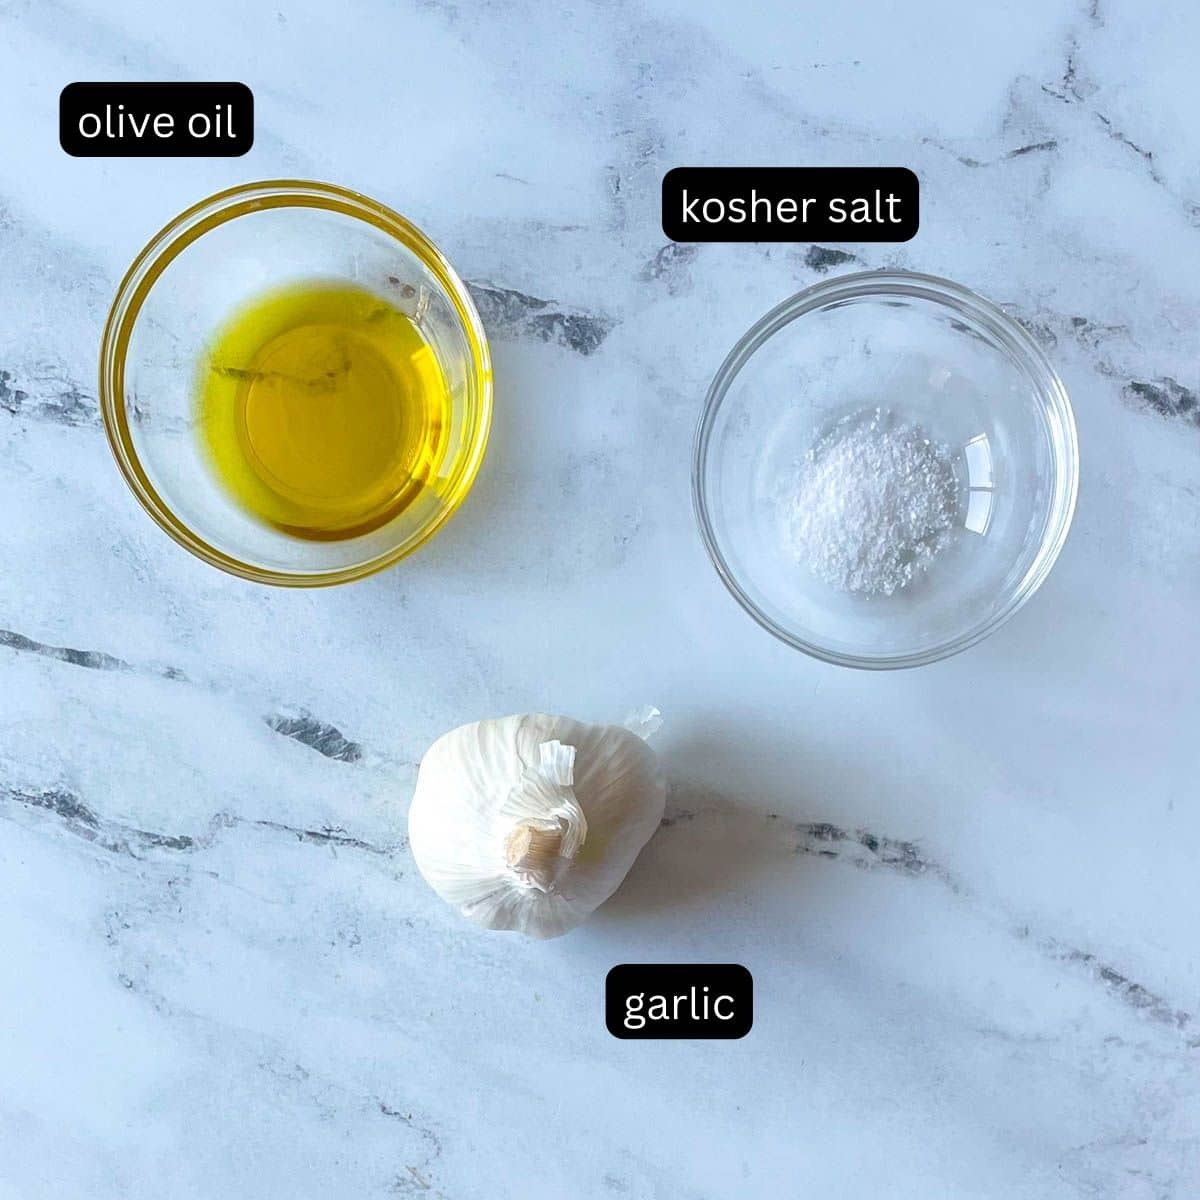 Olive oil, kosher salt, and a head of garlic are shown on a white marble counter.